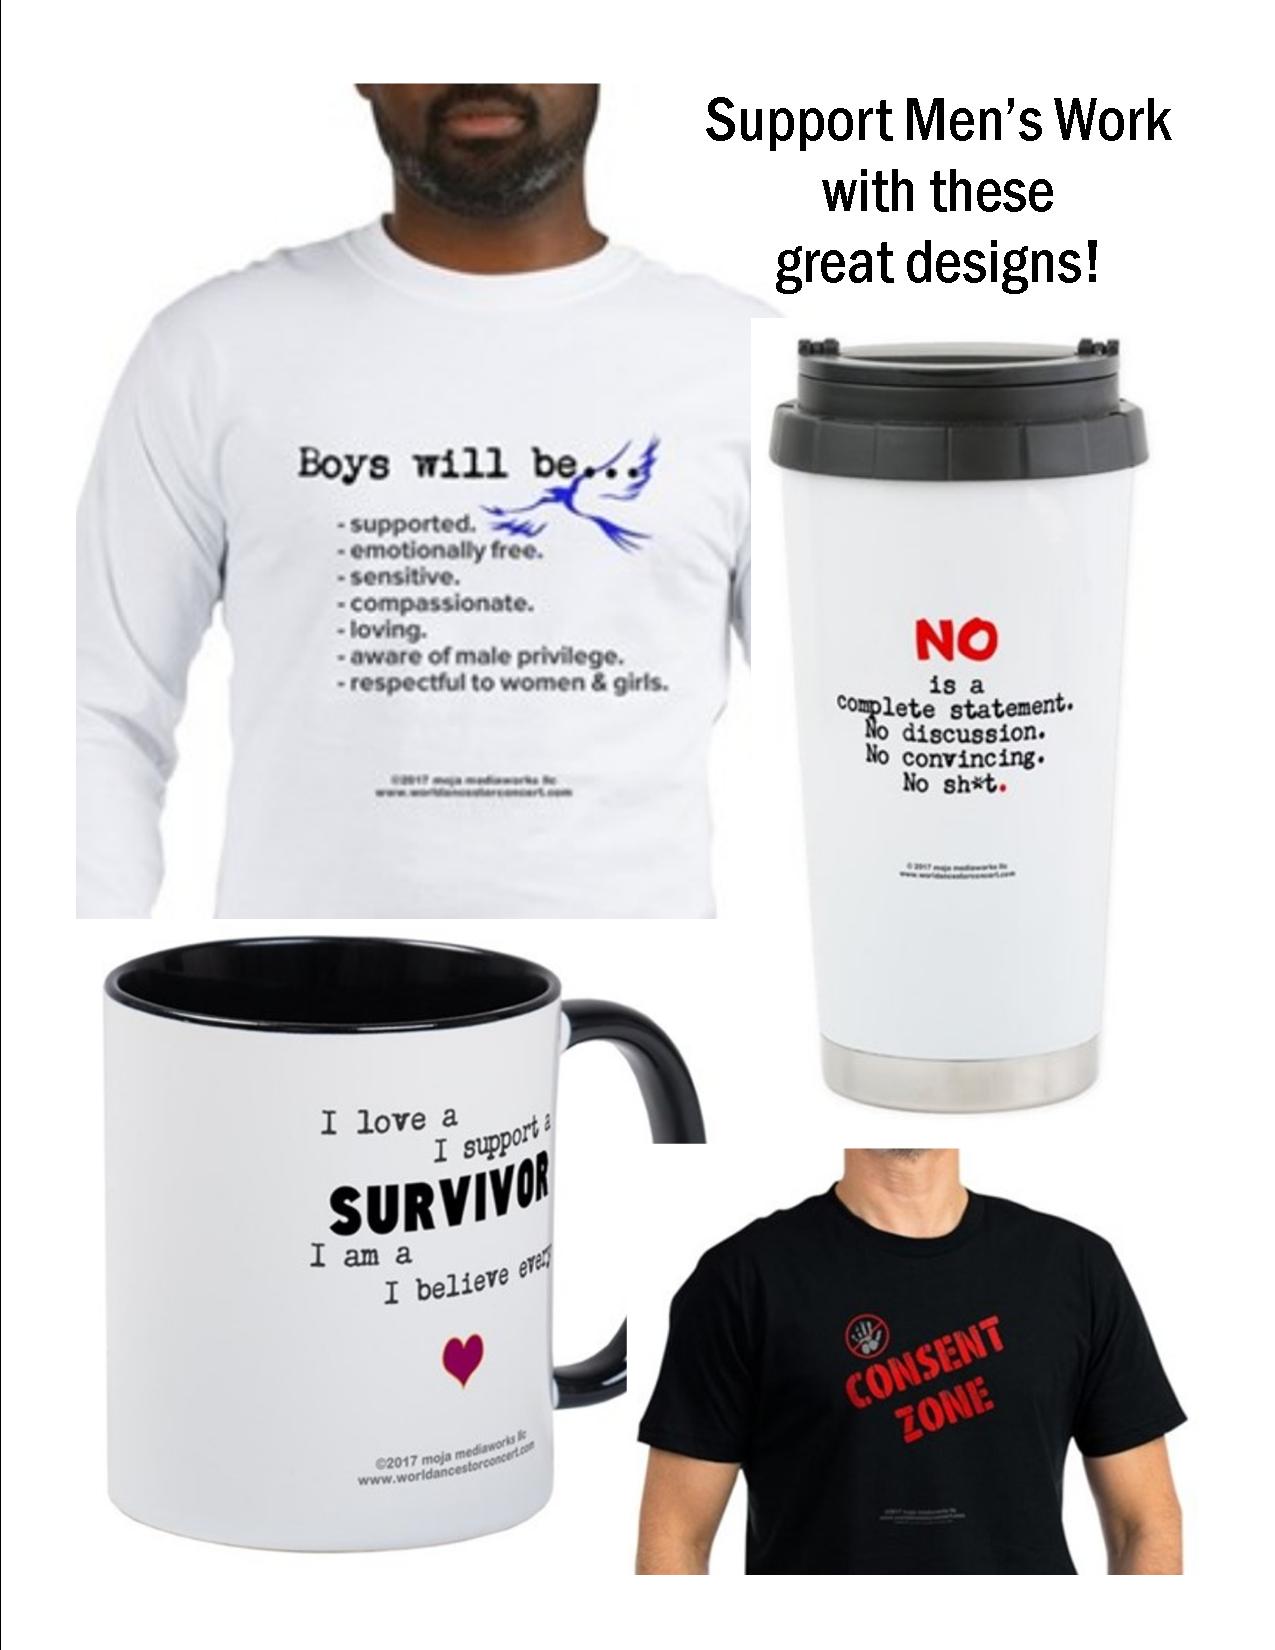 Composite image of 4 product design messages supportive of the Men's Work initiative